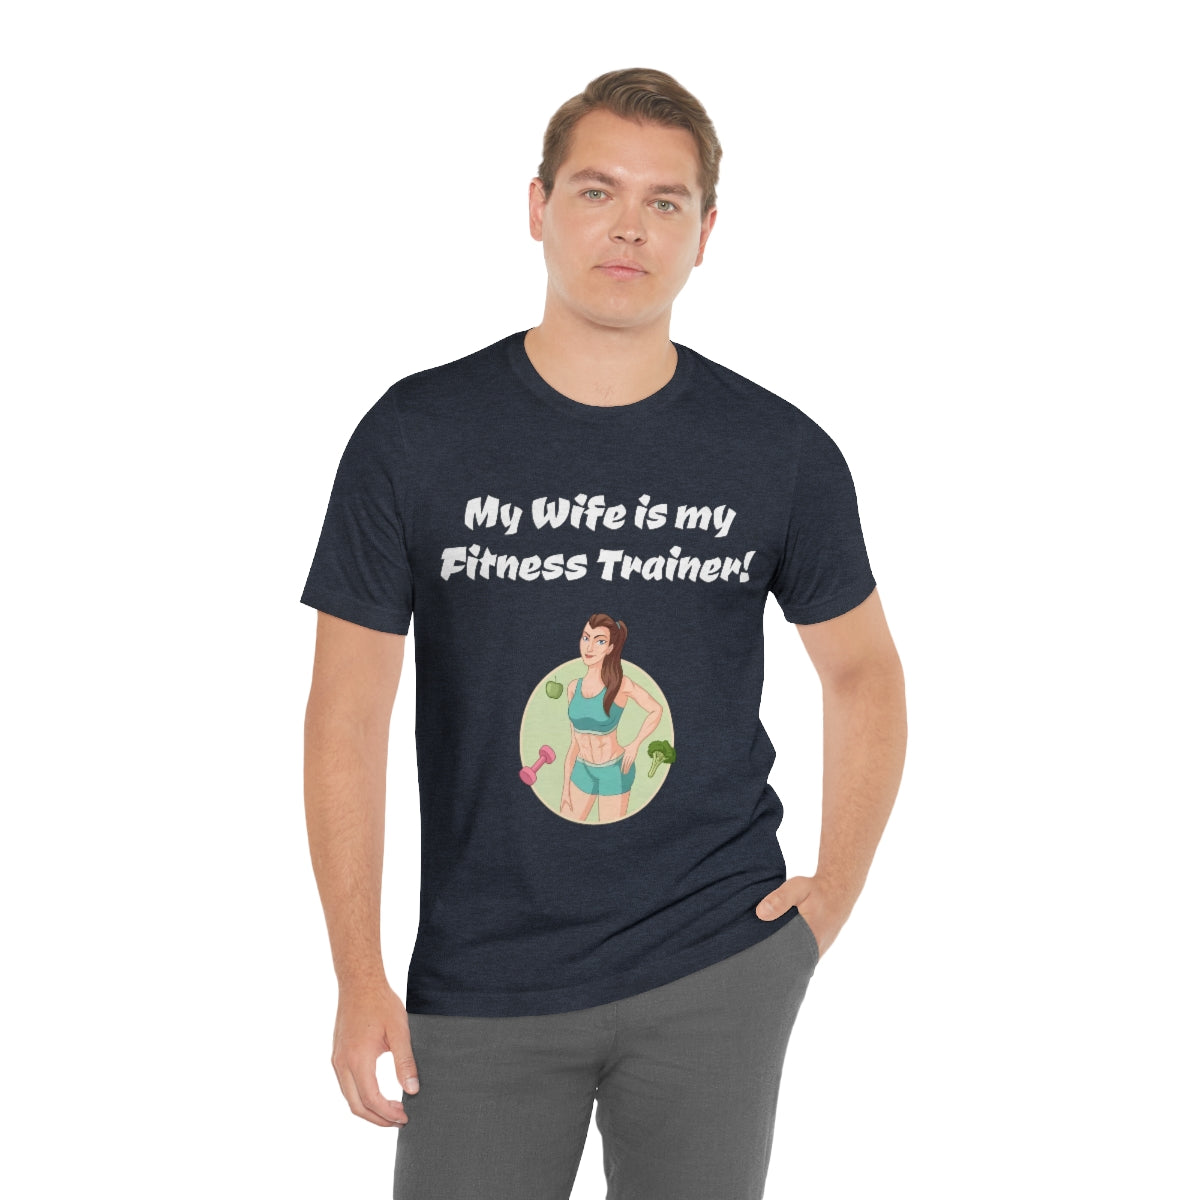 My wife is my fitness trainer - Funny Unisex Short Sleeve Tee - CrazyTomTShirts